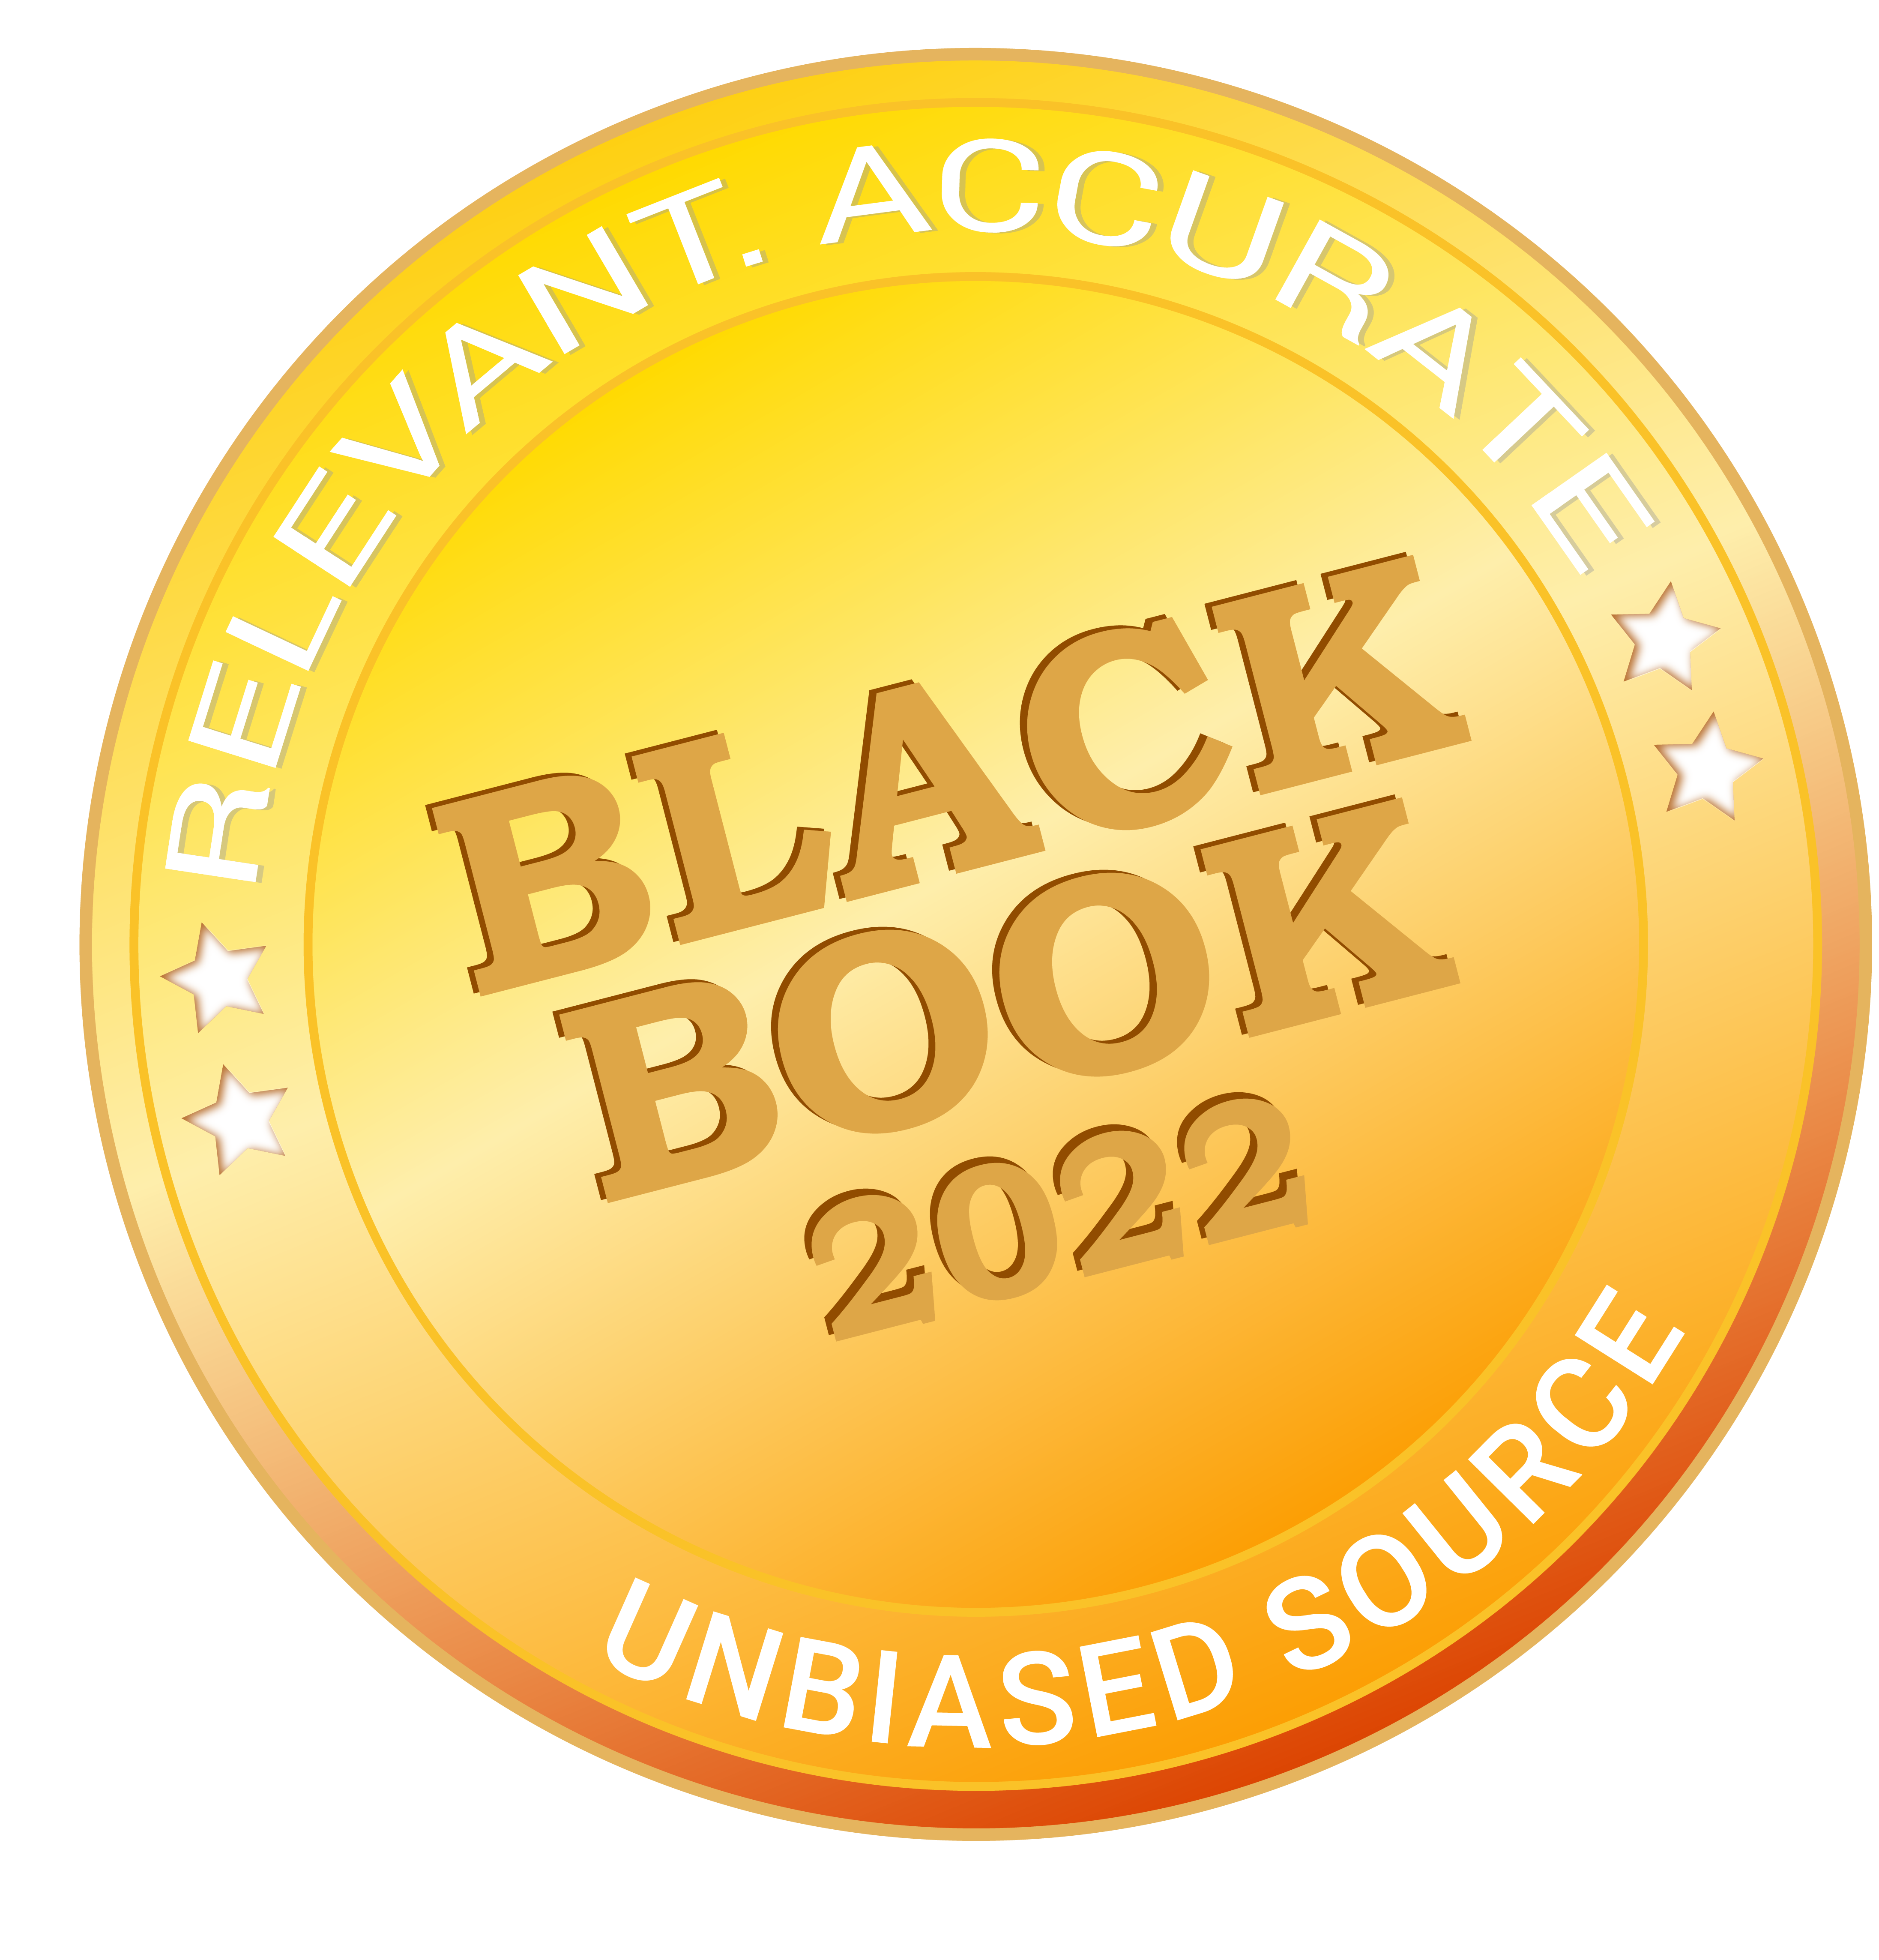 Featured Image for Black Book Research